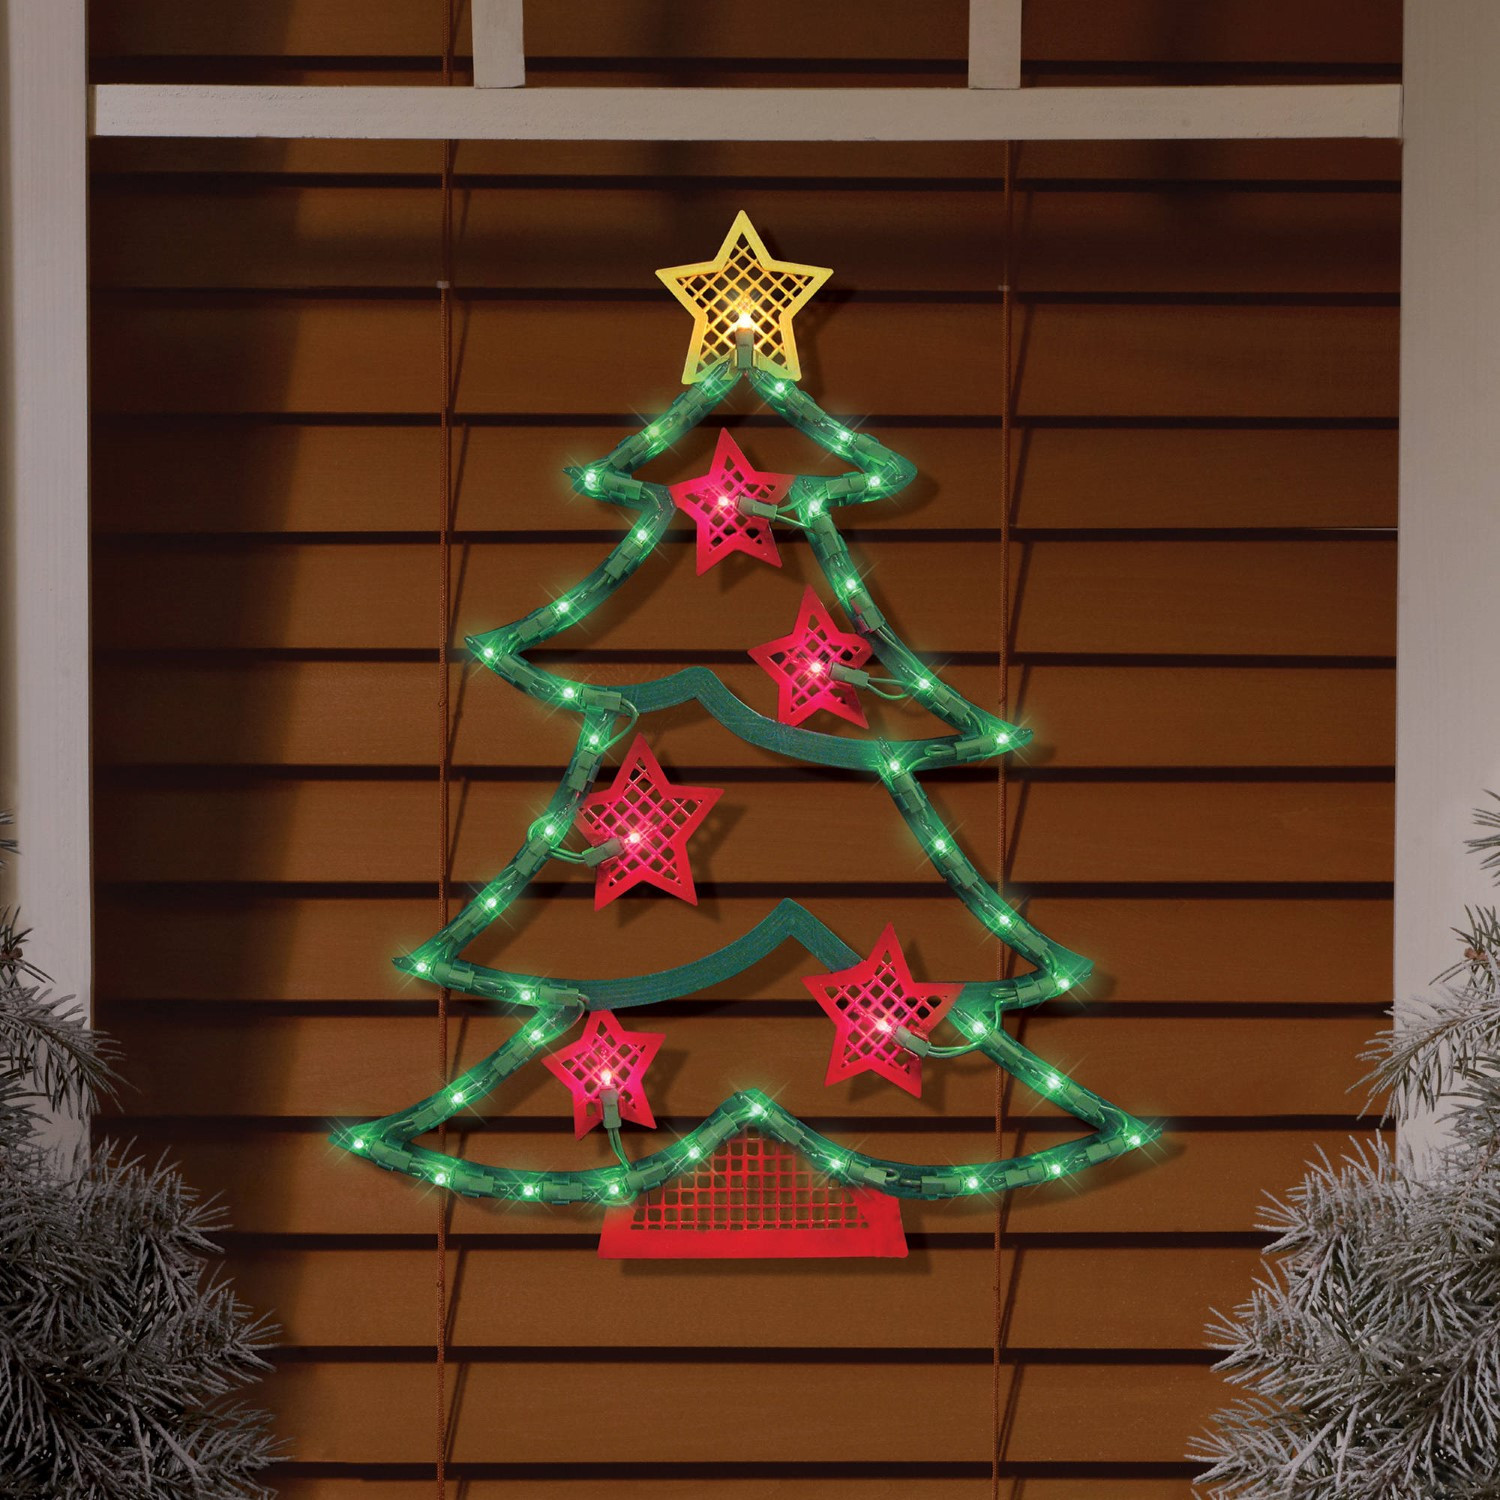 The 30 Best Ideas for Walmart Christmas Decorations Indoor - Home ...